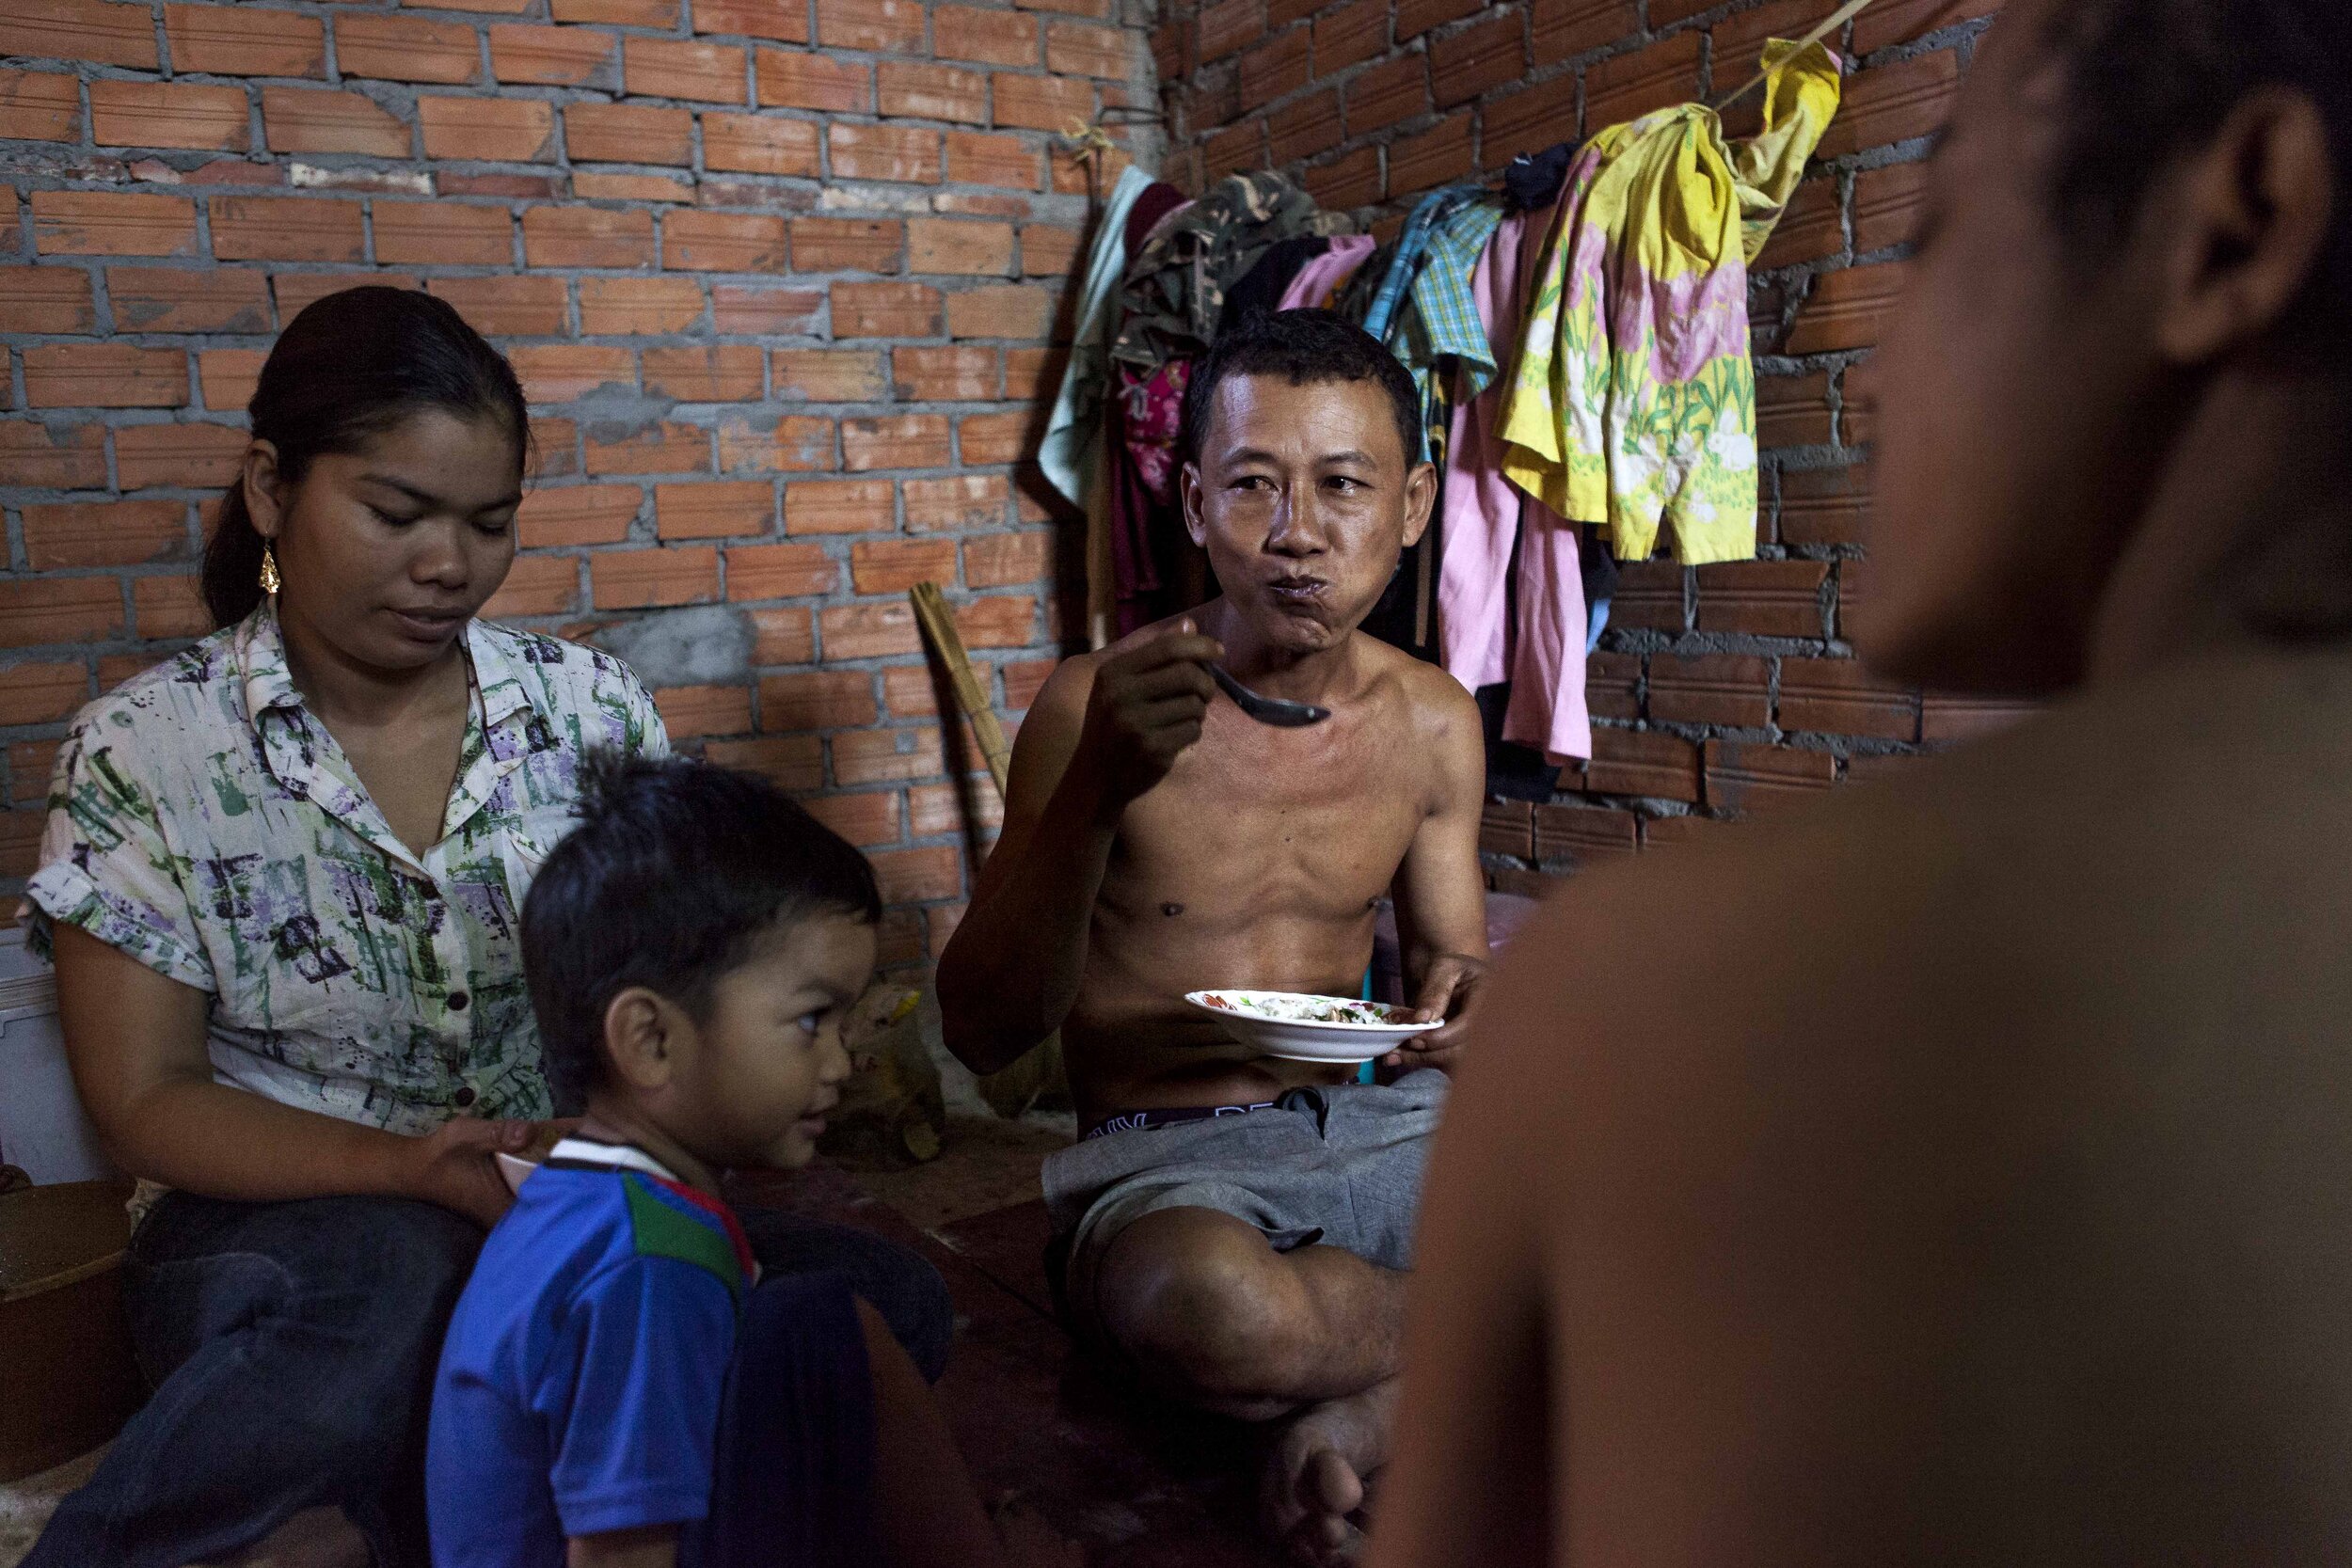  41 year old Khim Sarith eats breakfast with his family in one of the rooms on the building site they are living and working in. 